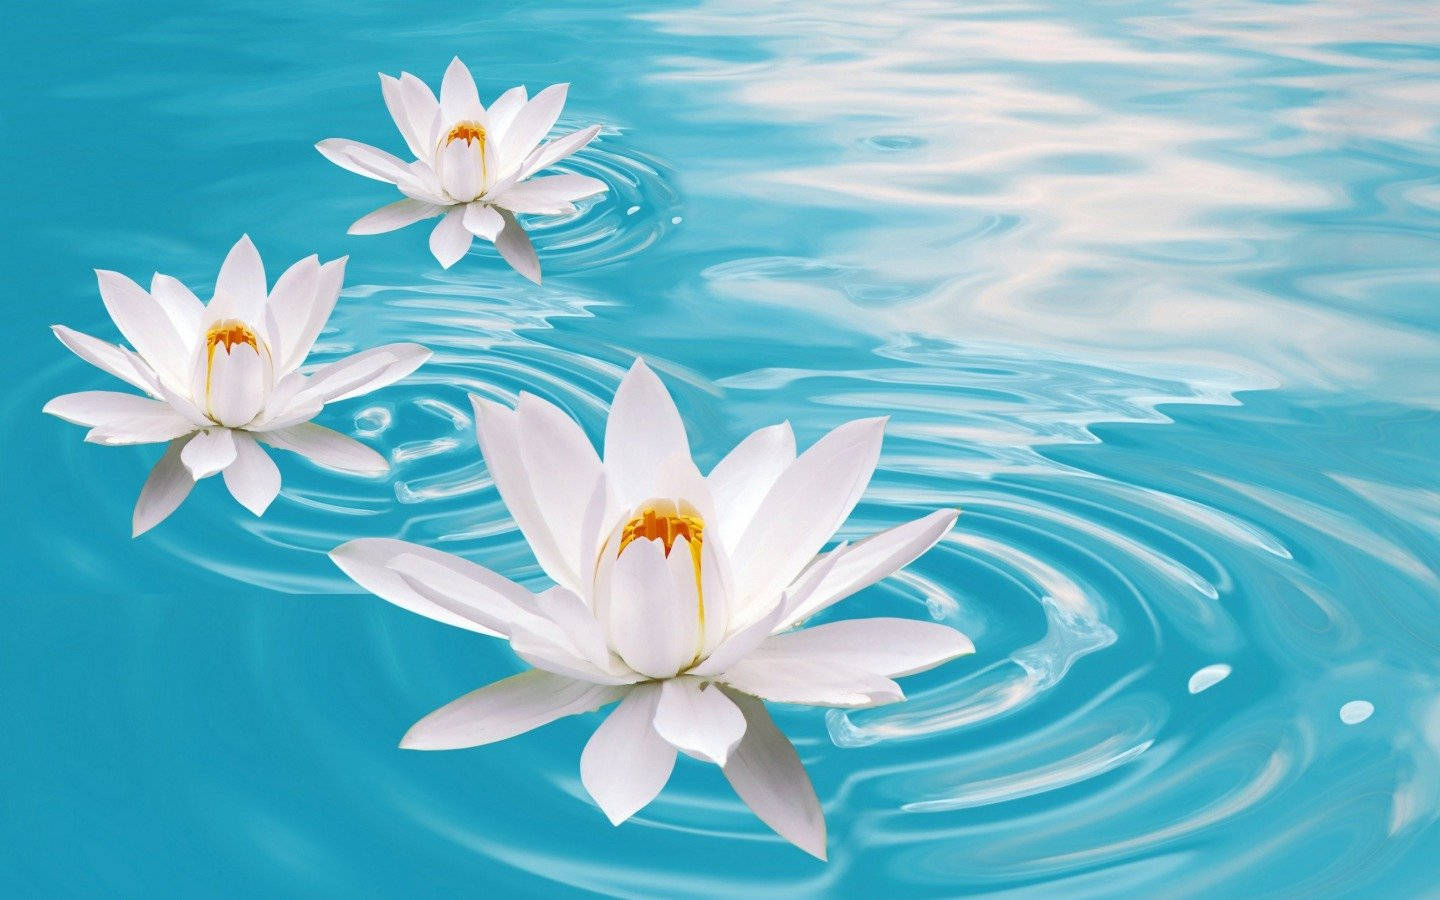 Caption: "graceful Water Lily Blooming In Serene Pond" Wallpaper